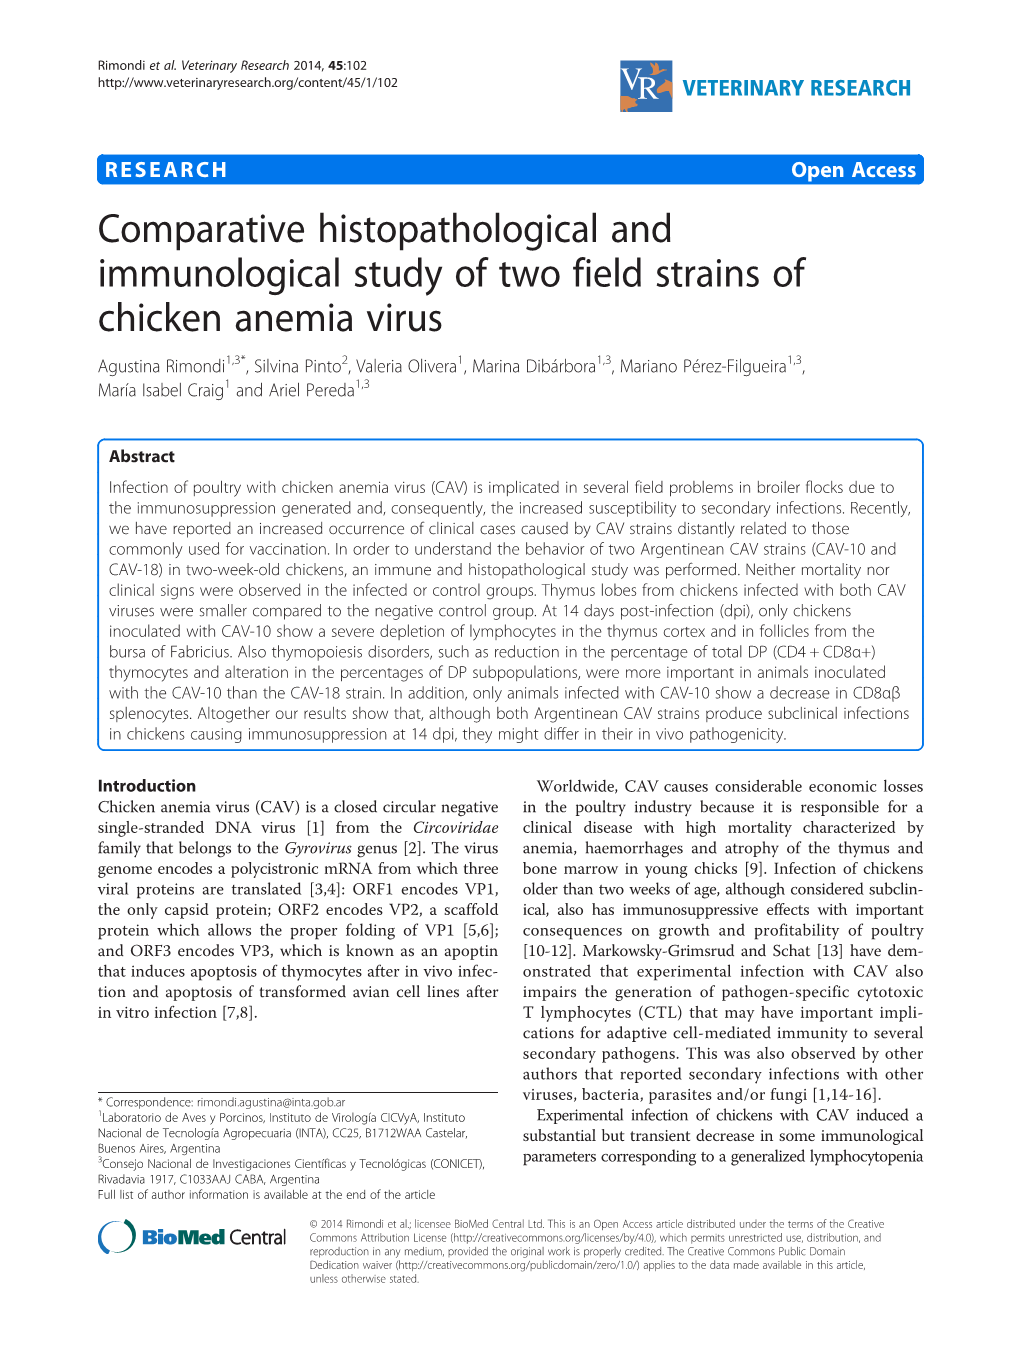 Comparative Histopathological and Immunological Study of Two Field